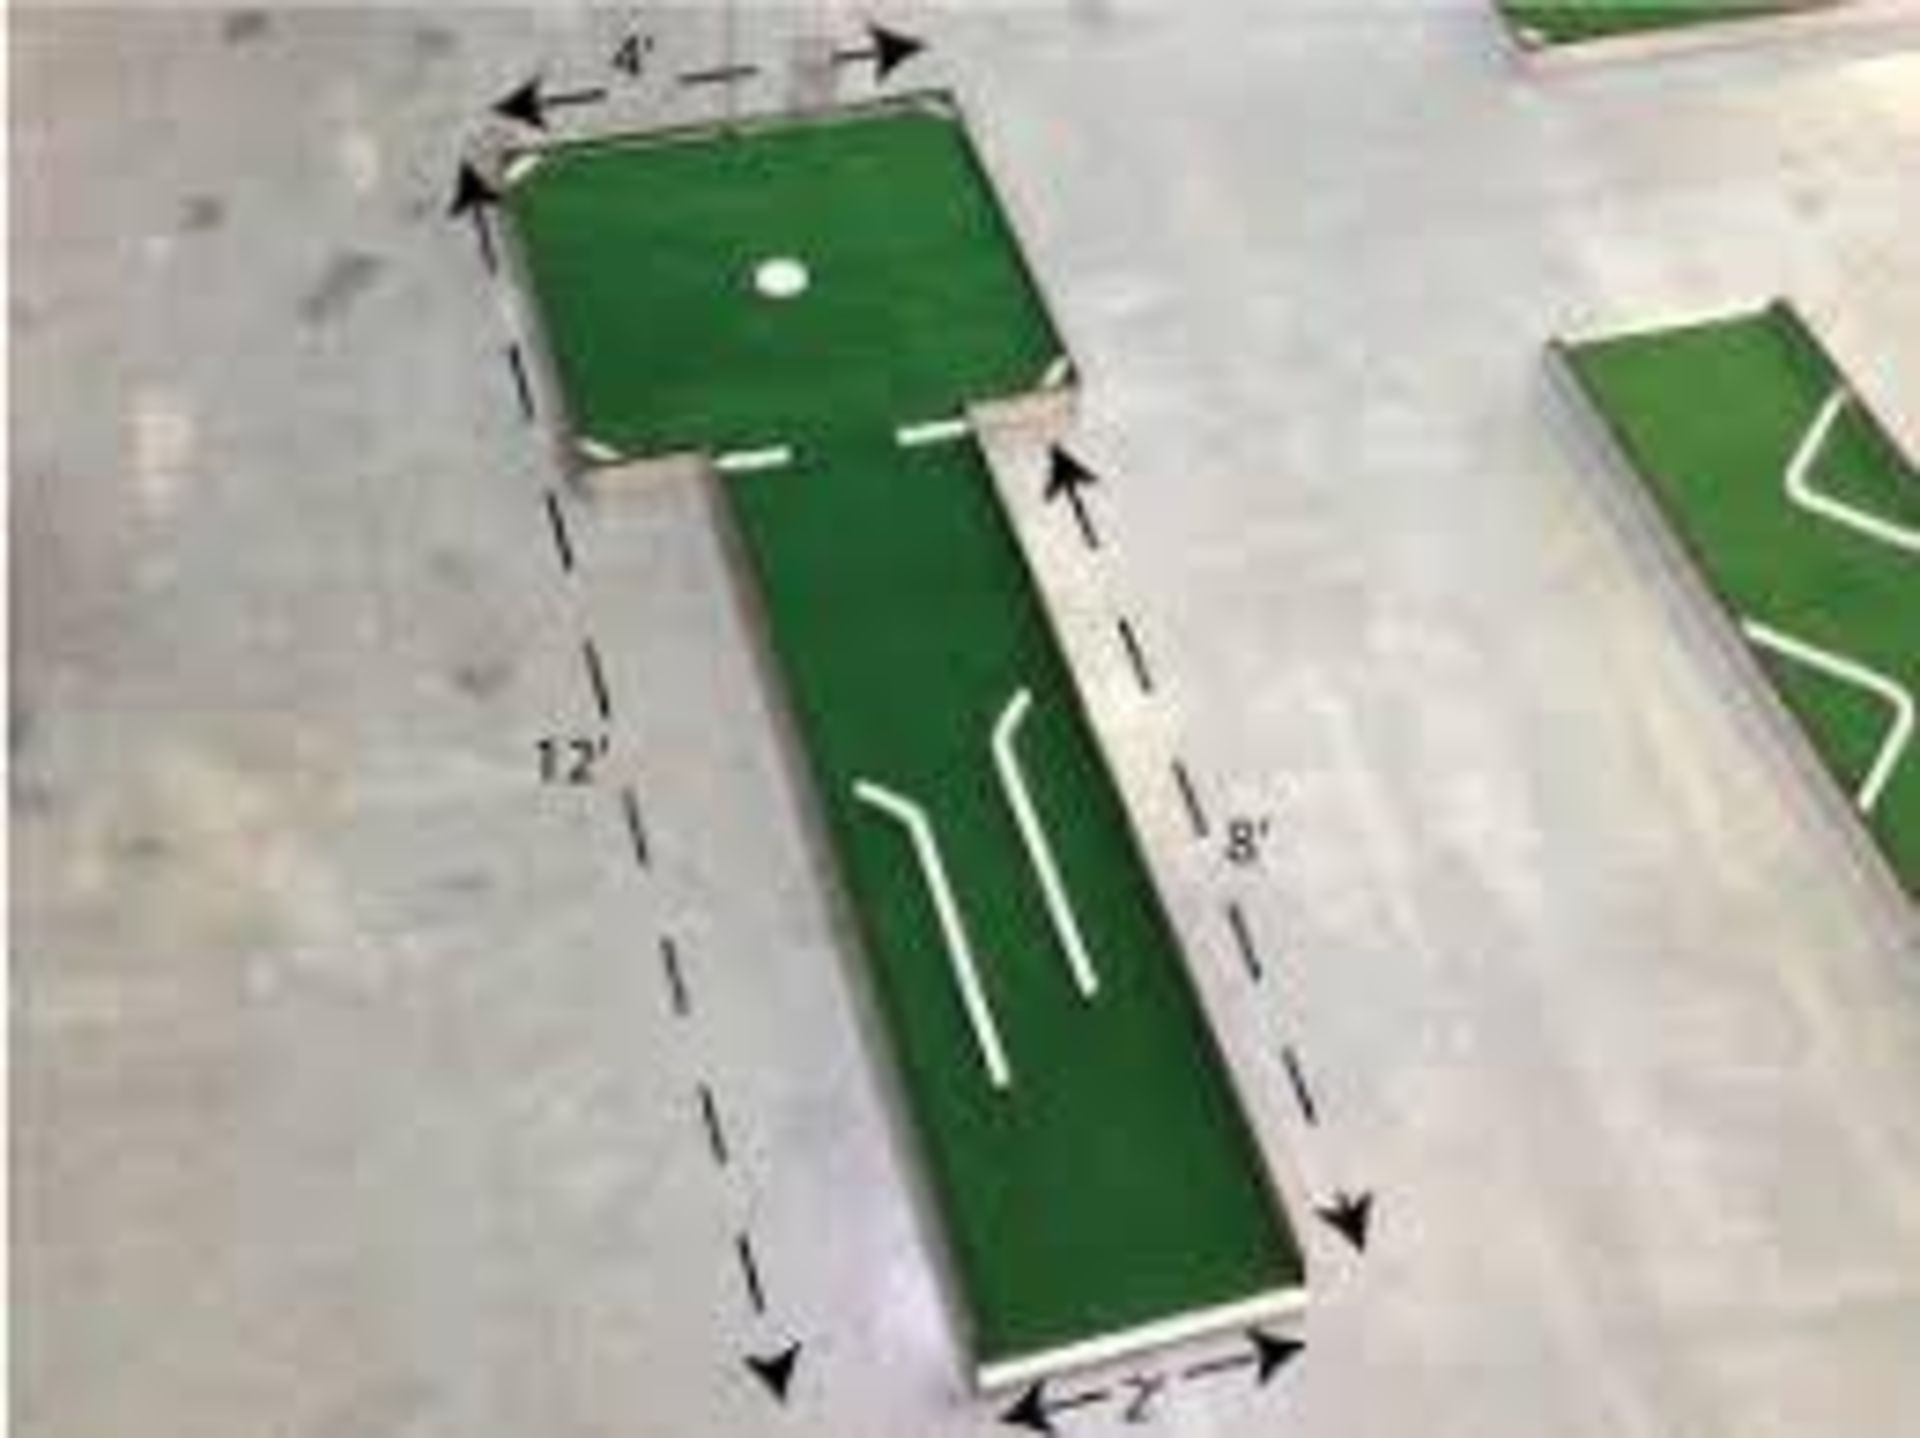 9-Hole Mini Golf System Complete with Obstacles, Putters, Golf Balls nad Storage Rack on Wheels - Image 2 of 6